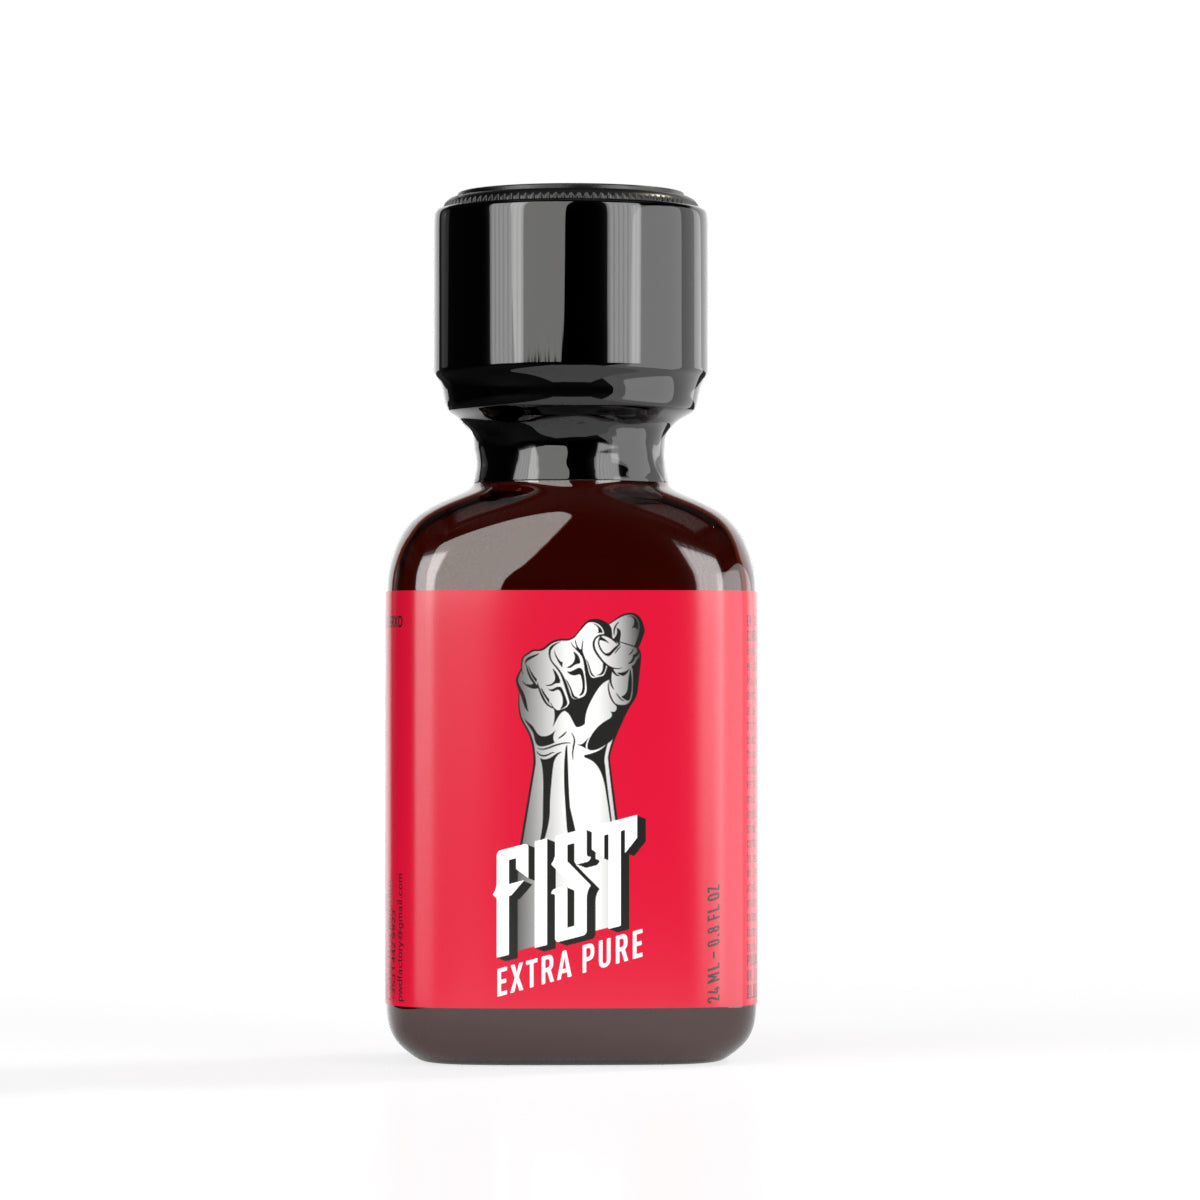 A product photo of First Extra Pure poppers in a 24ml bottle.